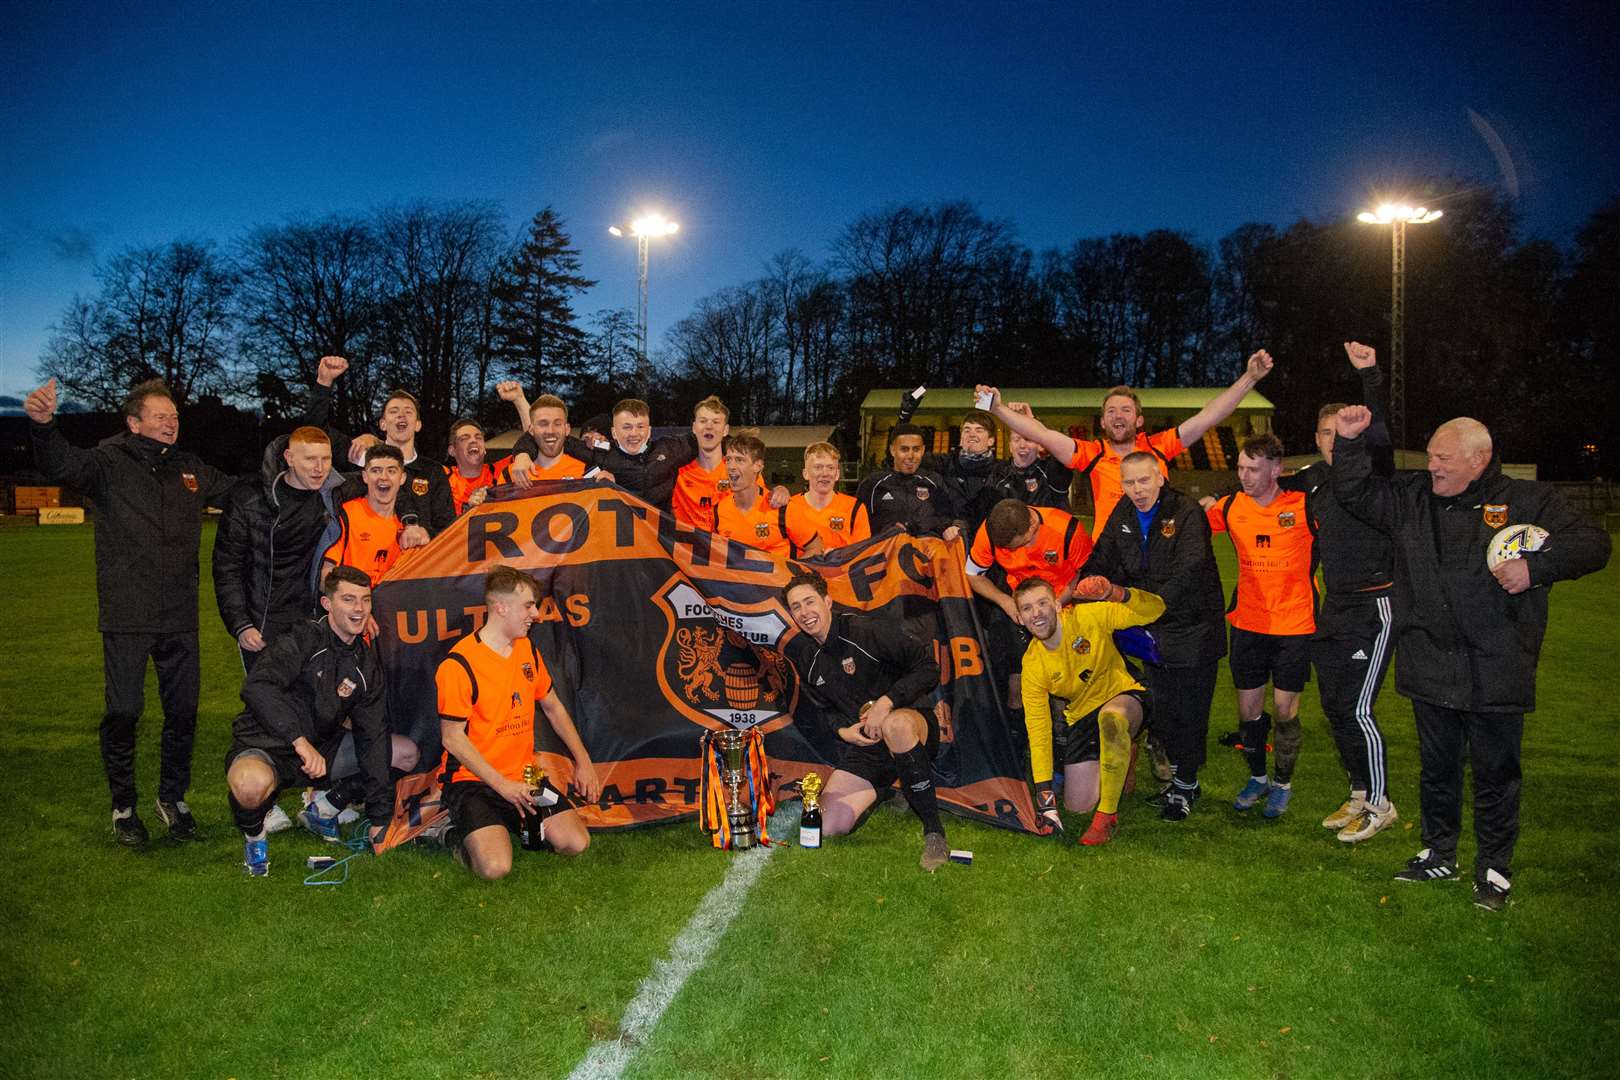 The Speysiders celebrate their cup triumph...Rothes FC (2) vs Buckie Thistle FC (1) - Highland League Cup Final - Christie Park, Huntly 31/10/2020...Picture: Daniel Forsyth..